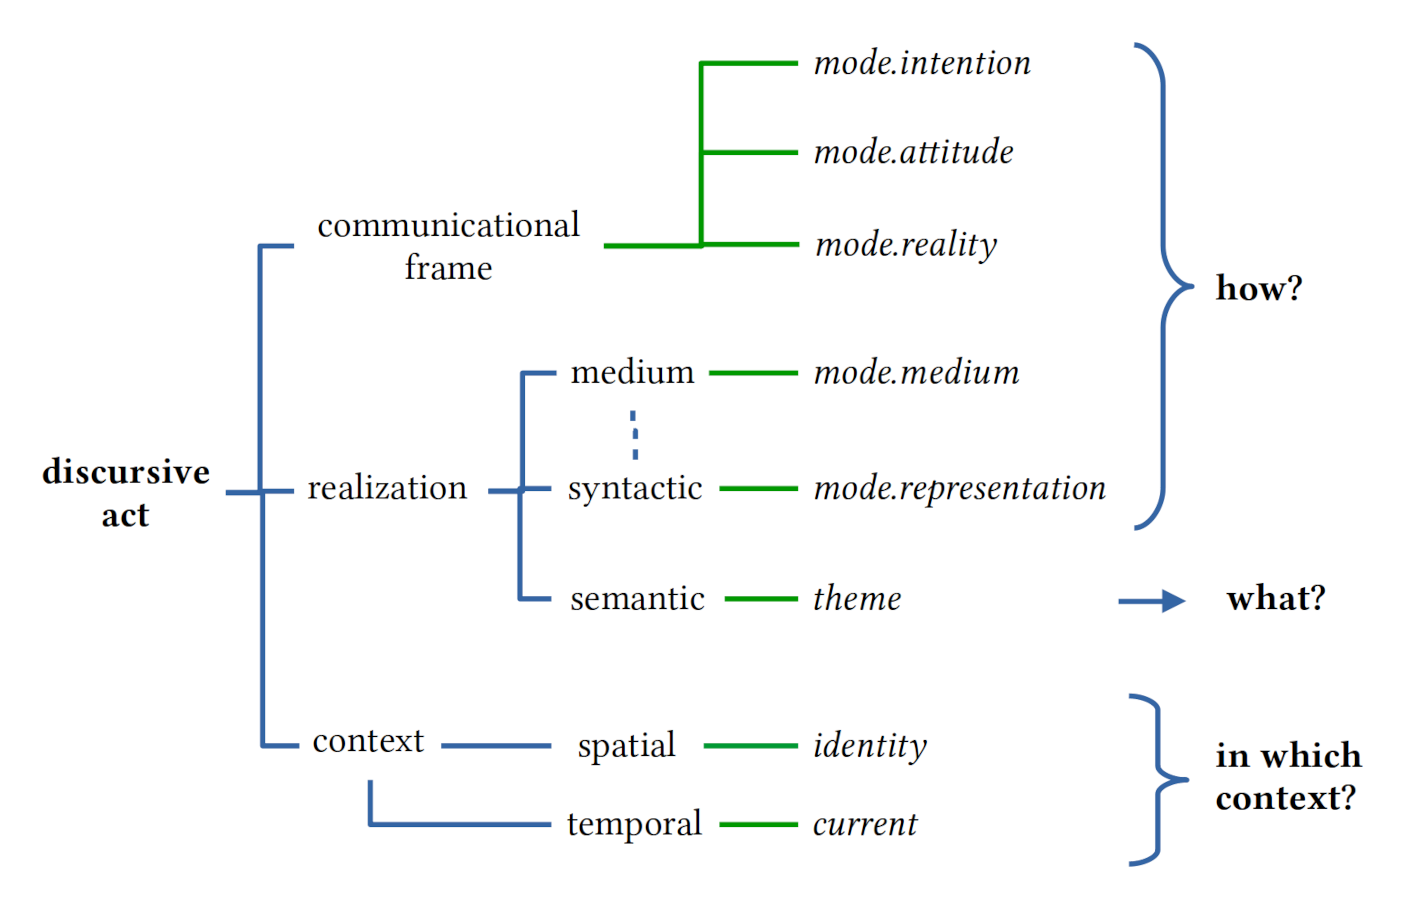 Kinds of subgenres in the context of a discursive model.